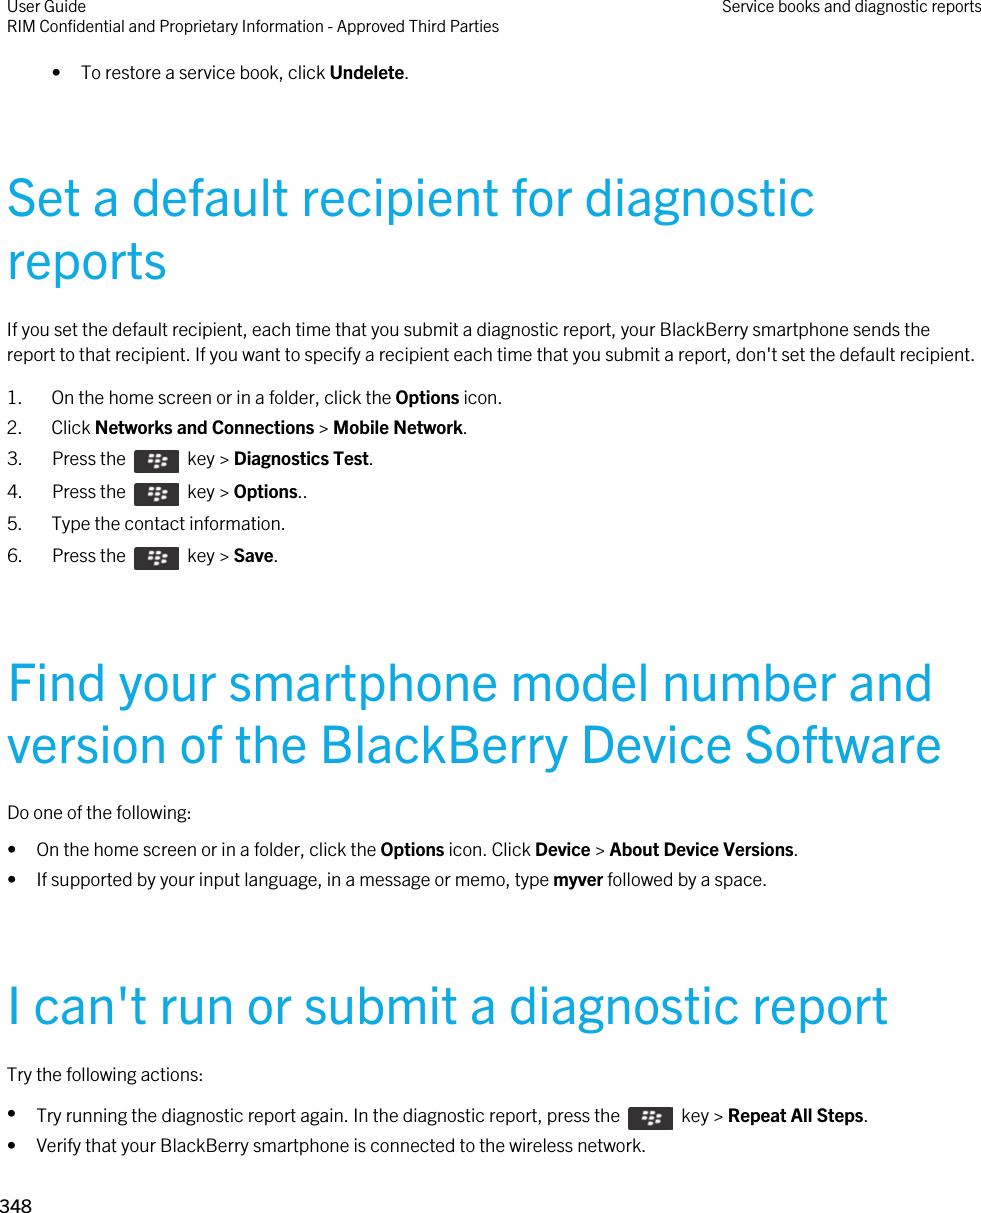 • To restore a service book, click Undelete.Set a default recipient for diagnostic reportsIf you set the default recipient, each time that you submit a diagnostic report, your BlackBerry smartphone sends the report to that recipient. If you want to specify a recipient each time that you submit a report, don&apos;t set the default recipient.1. On the home screen or in a folder, click the Options icon.2. Click Networks and Connections &gt; Mobile Network.3.  Press the    key &gt; Diagnostics Test. 4.  Press the    key &gt; Options.. 5. Type the contact information.6.  Press the    key &gt; Save. Find your smartphone model number and version of the BlackBerry Device SoftwareDo one of the following:• On the home screen or in a folder, click the Options icon. Click Device &gt; About Device Versions.• If supported by your input language, in a message or memo, type myver followed by a space.I can&apos;t run or submit a diagnostic reportTry the following actions:•Try running the diagnostic report again. In the diagnostic report, press the    key &gt; Repeat All Steps.• Verify that your BlackBerry smartphone is connected to the wireless network.User GuideRIM Confidential and Proprietary Information - Approved Third Parties Service books and diagnostic reports348 